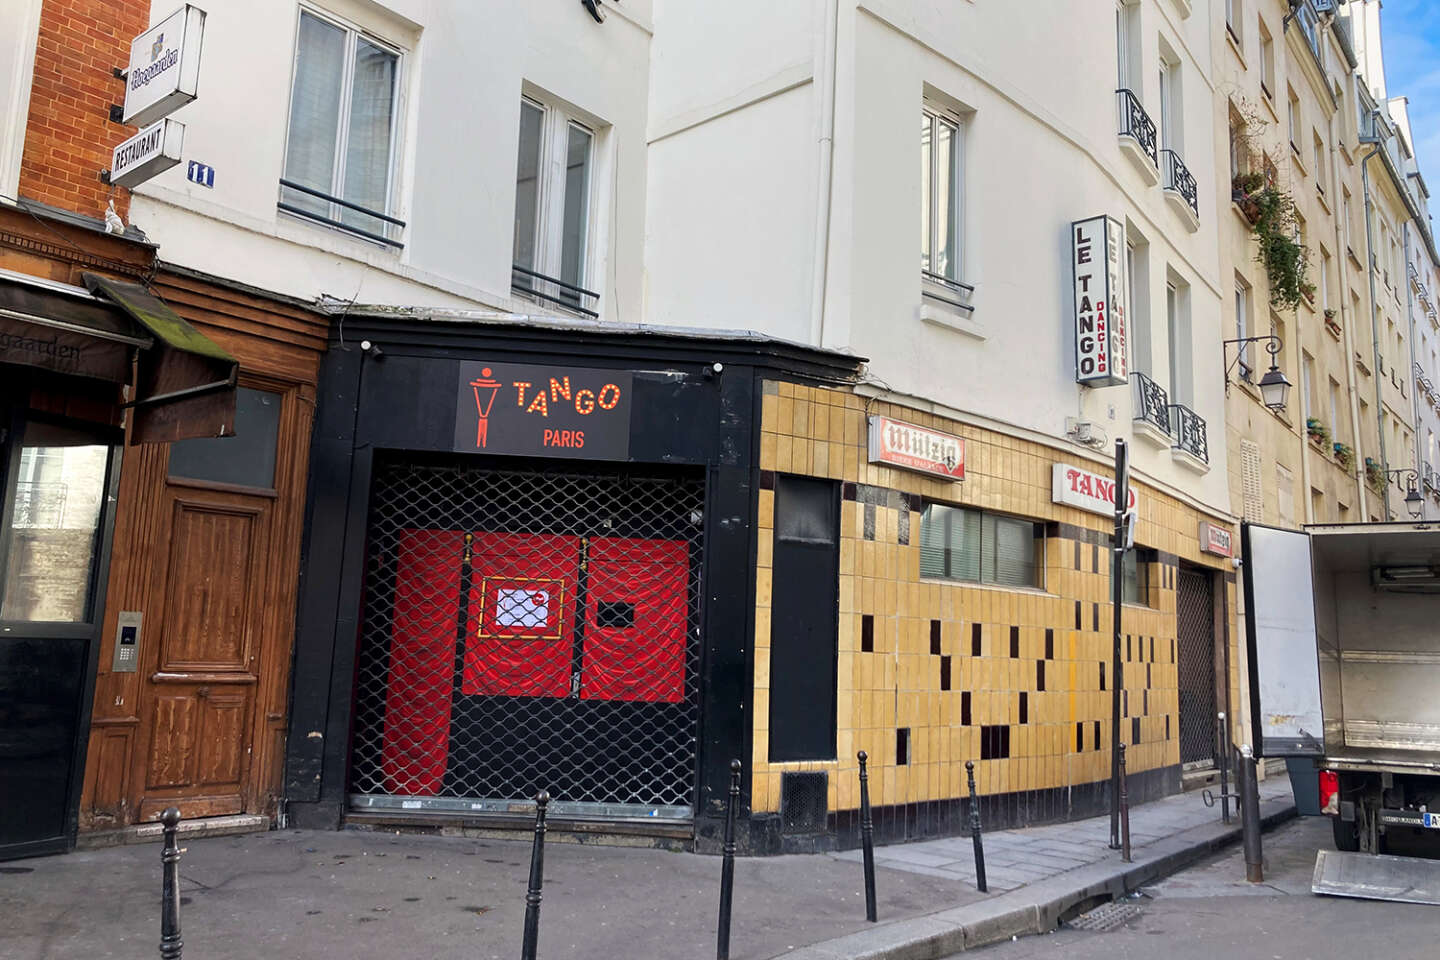 Le Tango, a popular gay dance hall, opens after coming close to closing down